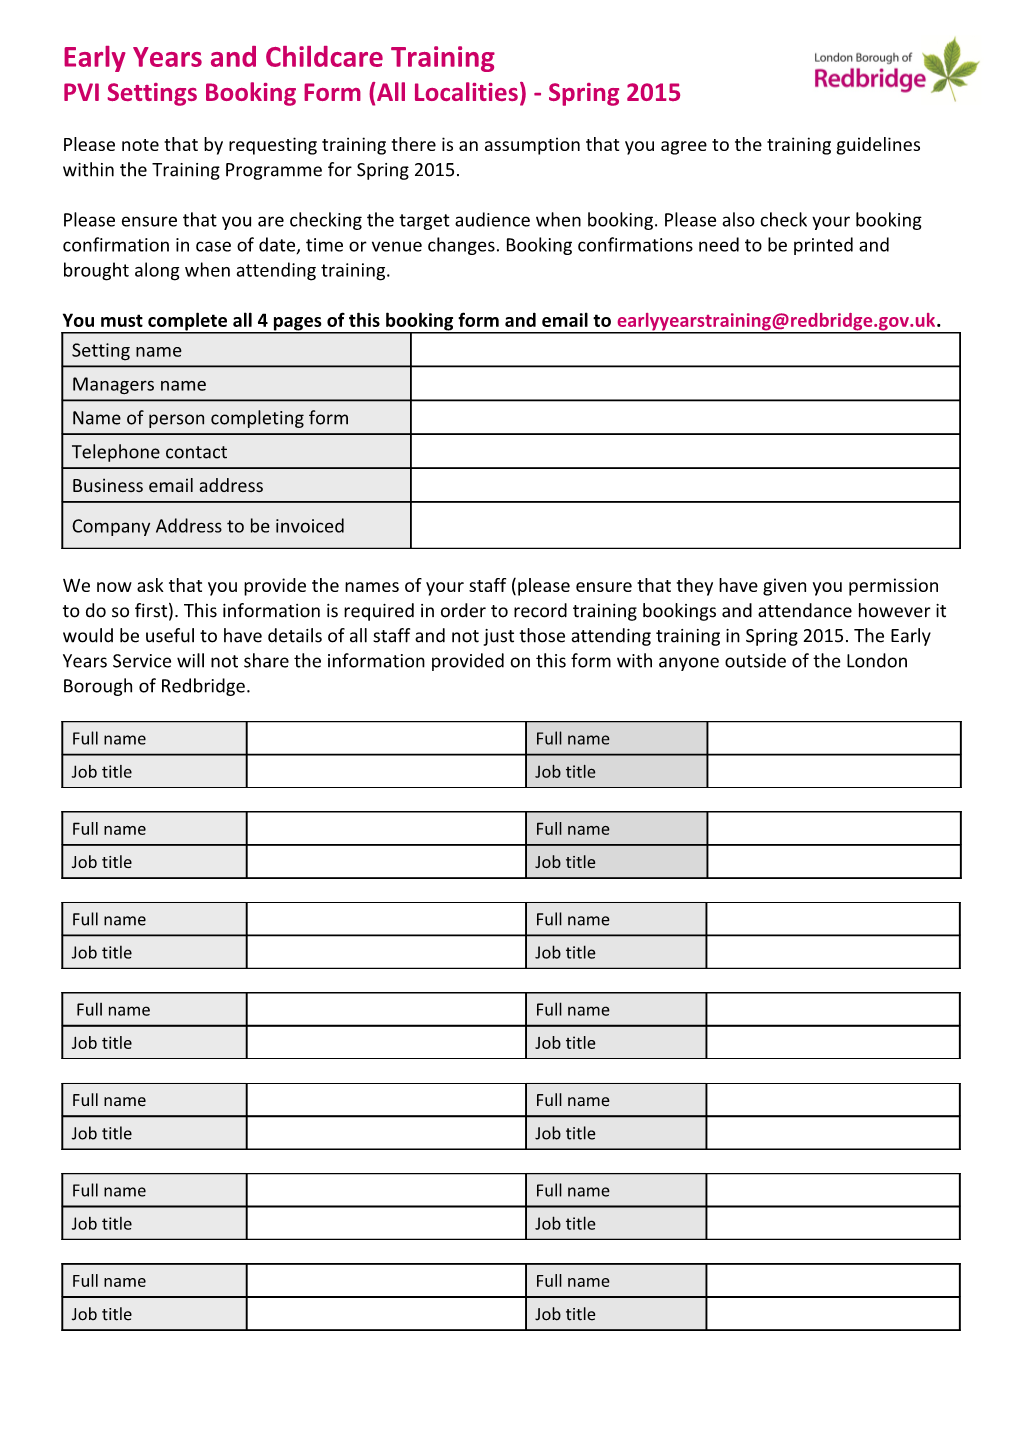 PVI Settings Booking Form (All Localities) - Spring 2015